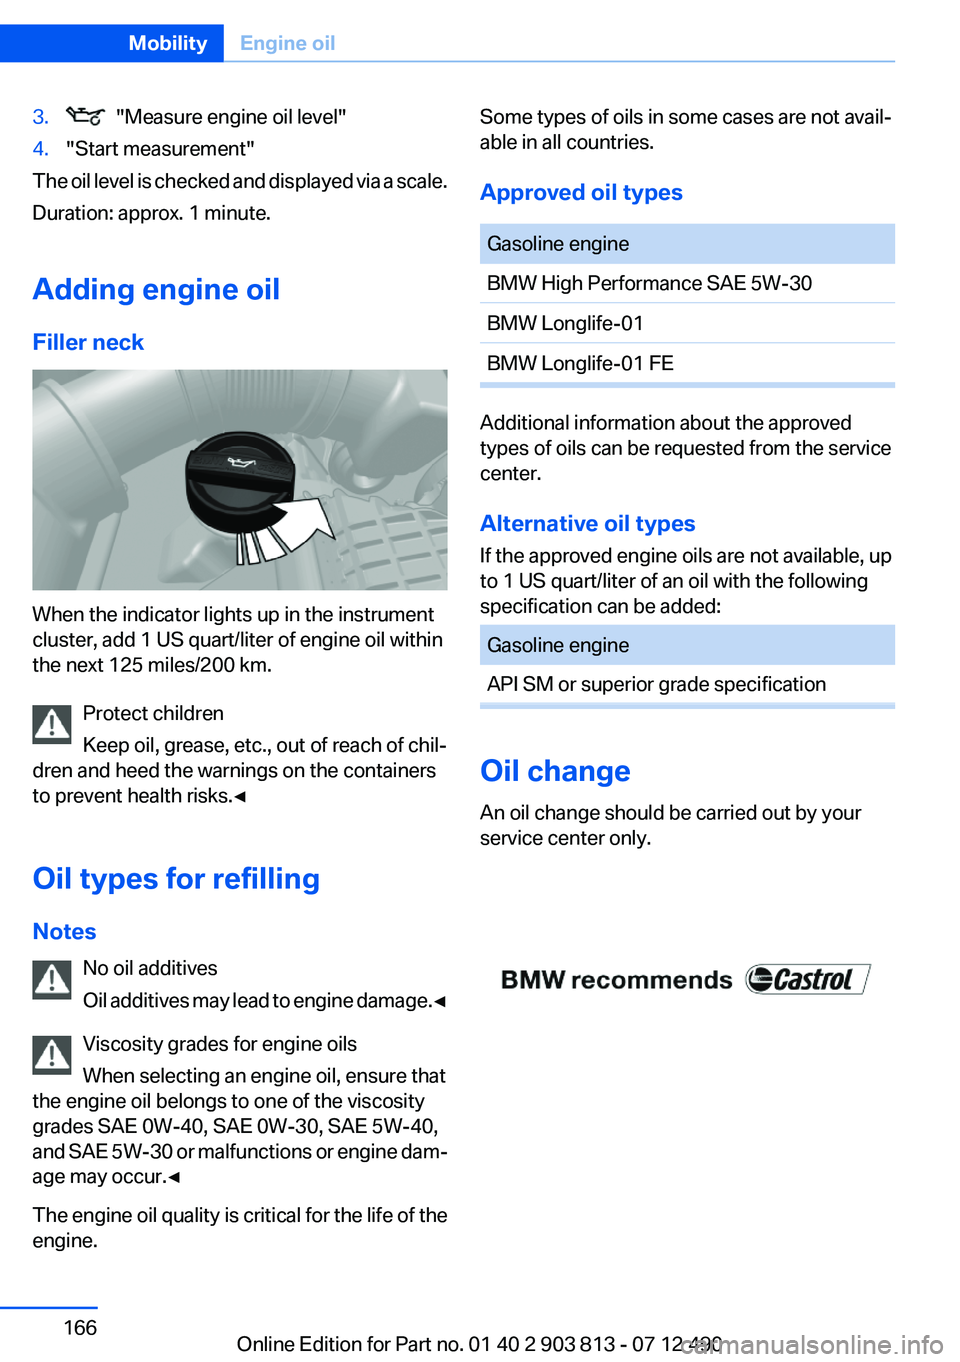 BMW X3 XDRIVE 35I 2013  Owners Manual 3.  "Measure engine oil level"4."Start measurement"
The oil level is checked and displayed via a scale.
Duration: approx. 1 minute.
Adding engine oil
Filler neck
When the indicator lig